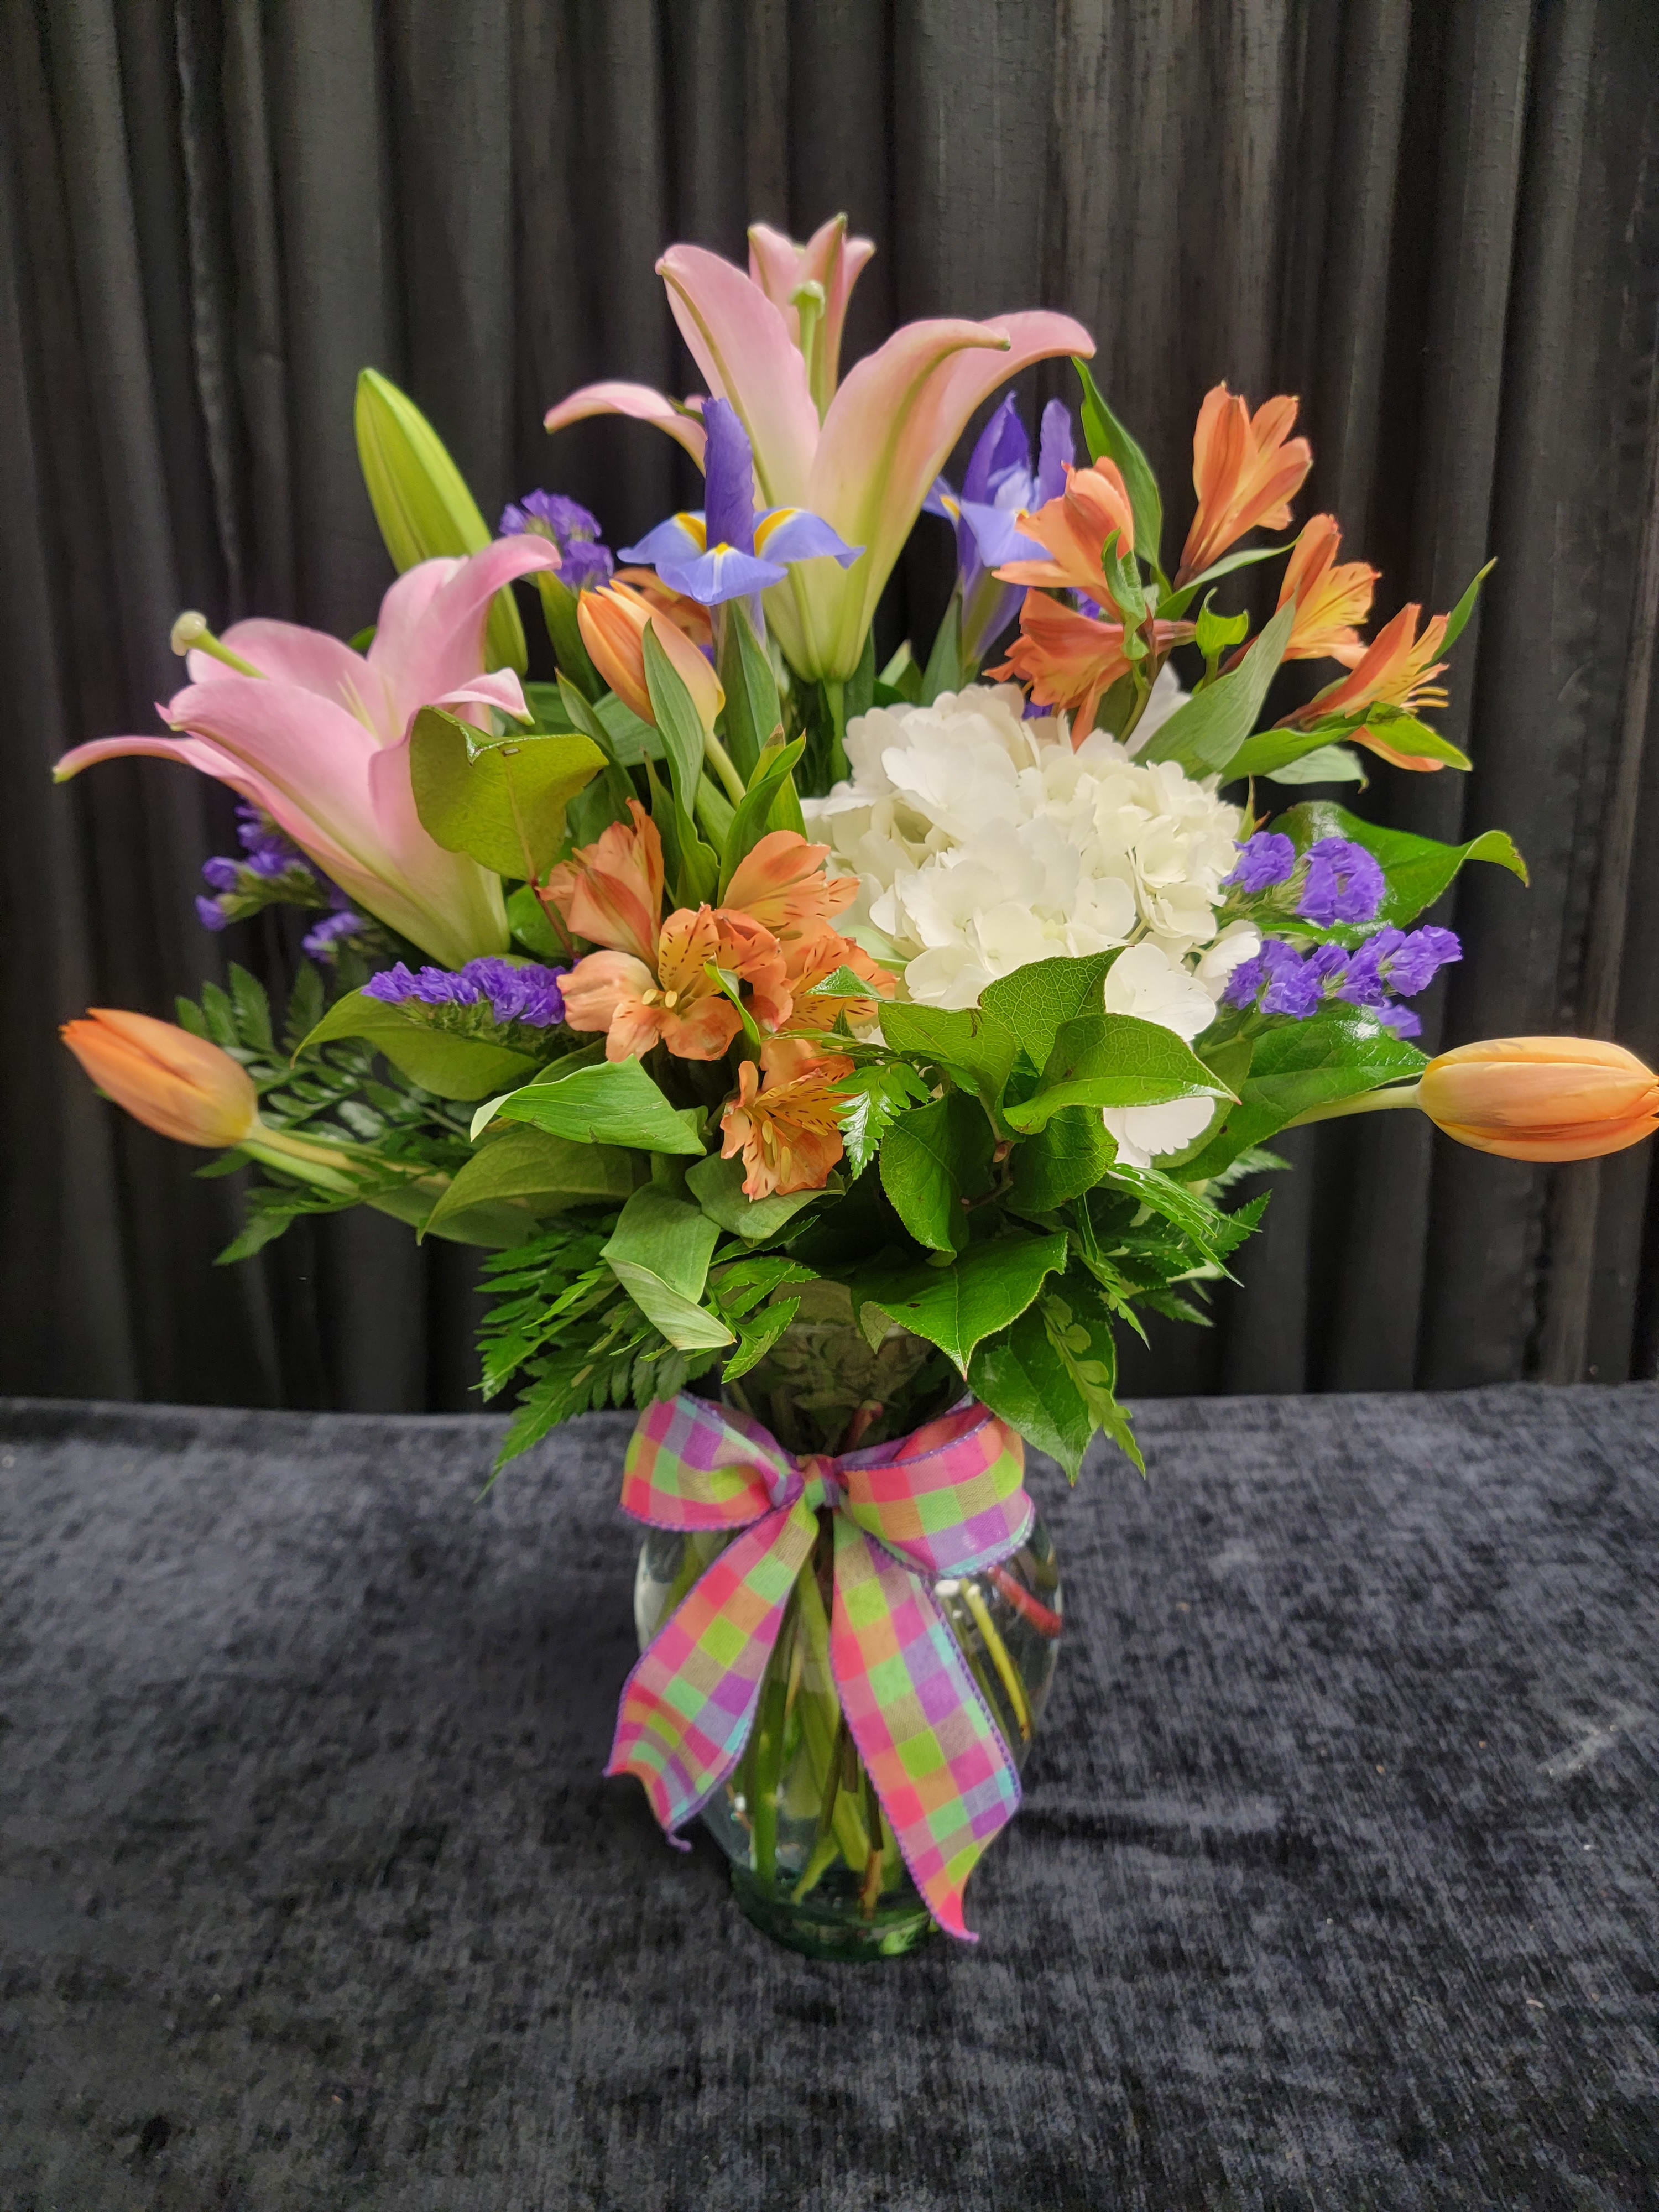 Celebrate mom - A mixed vase arrangement filled with lilies, tulips, hydrangea, iris, and alstromeria. Colors may vary slightly.